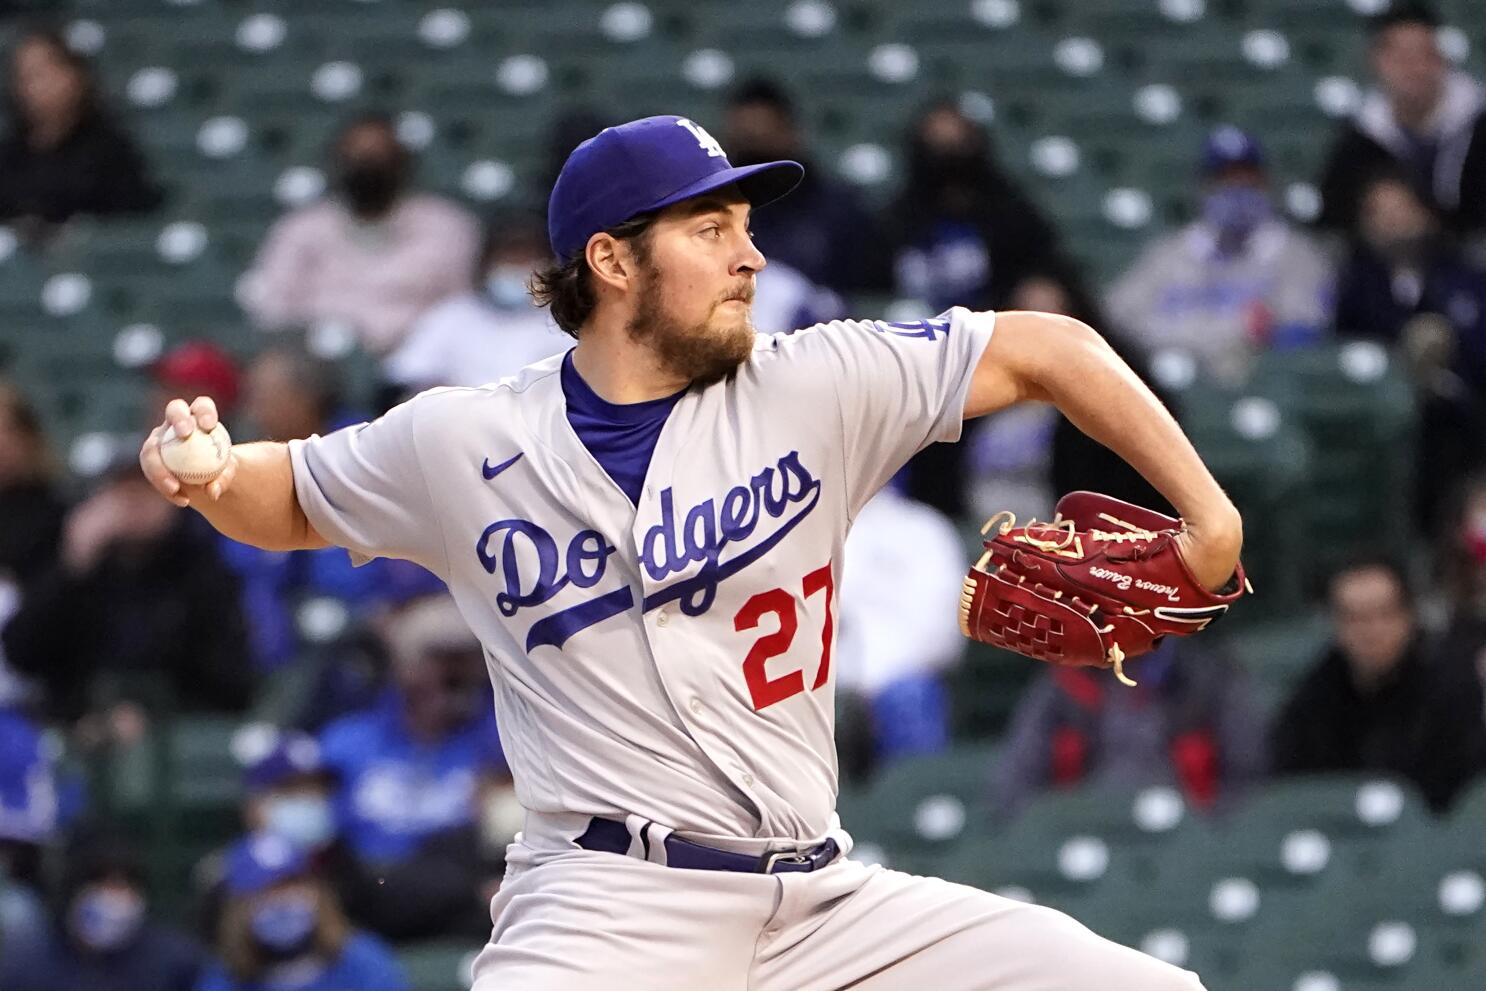 Dodgers News: Trevor Bauer's Administrative Leave Extended To Aug. 27